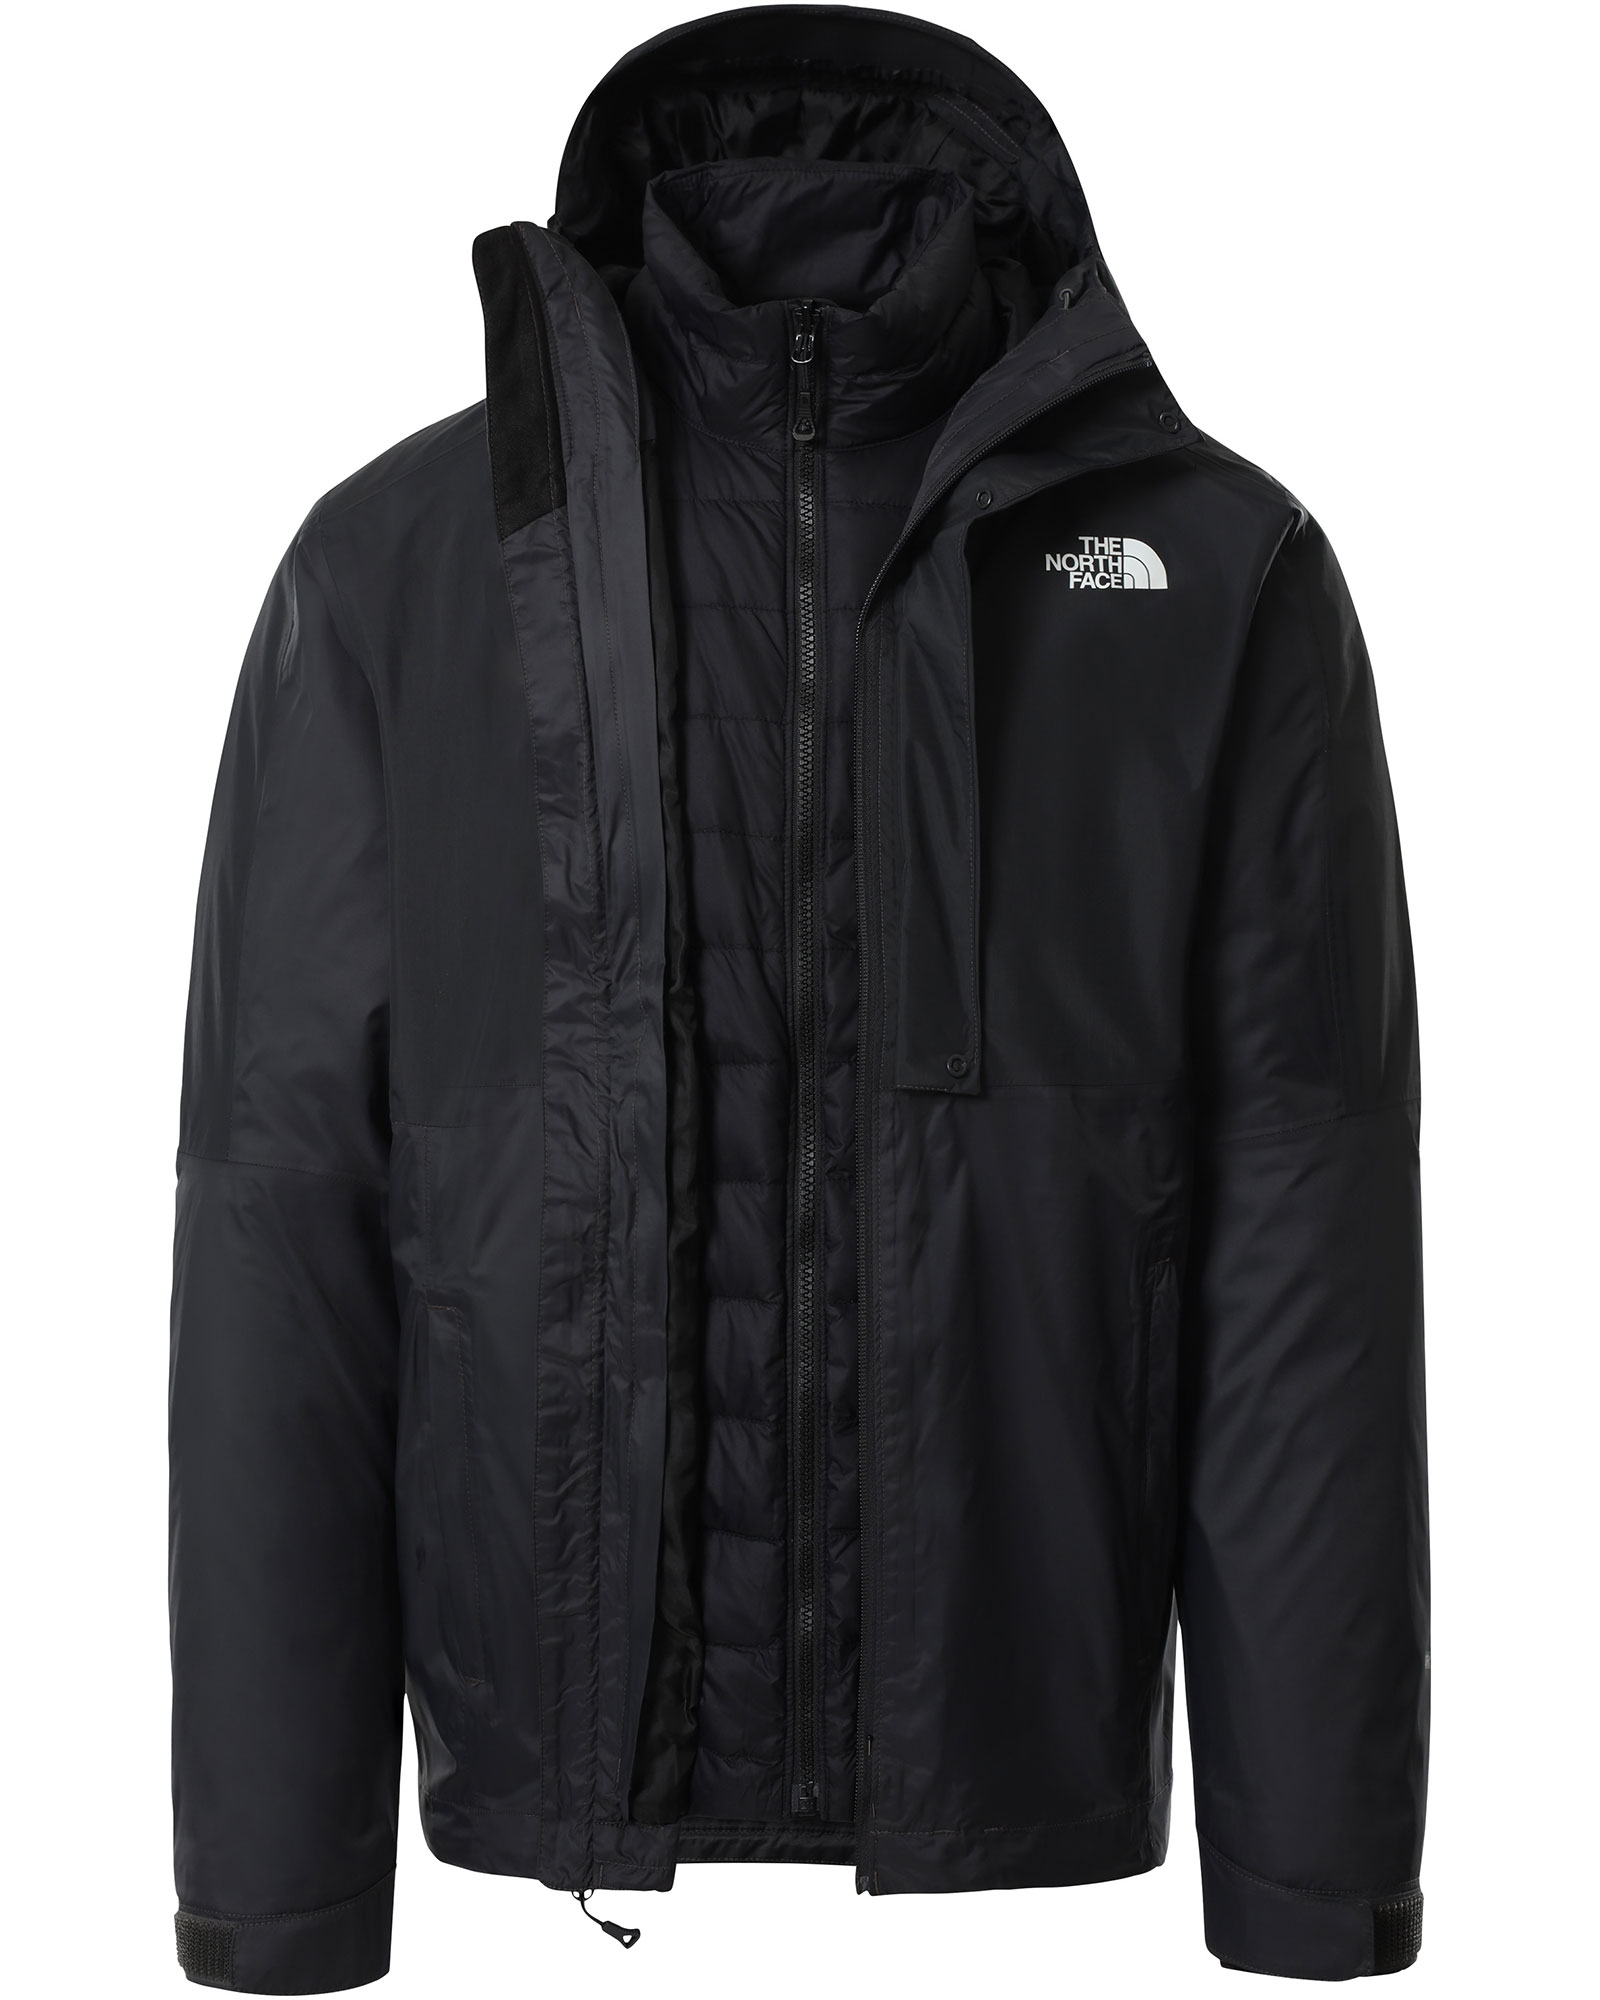 The North Face Down Triclimate DryVent Men’s Jacket - Asphalt Grey XS